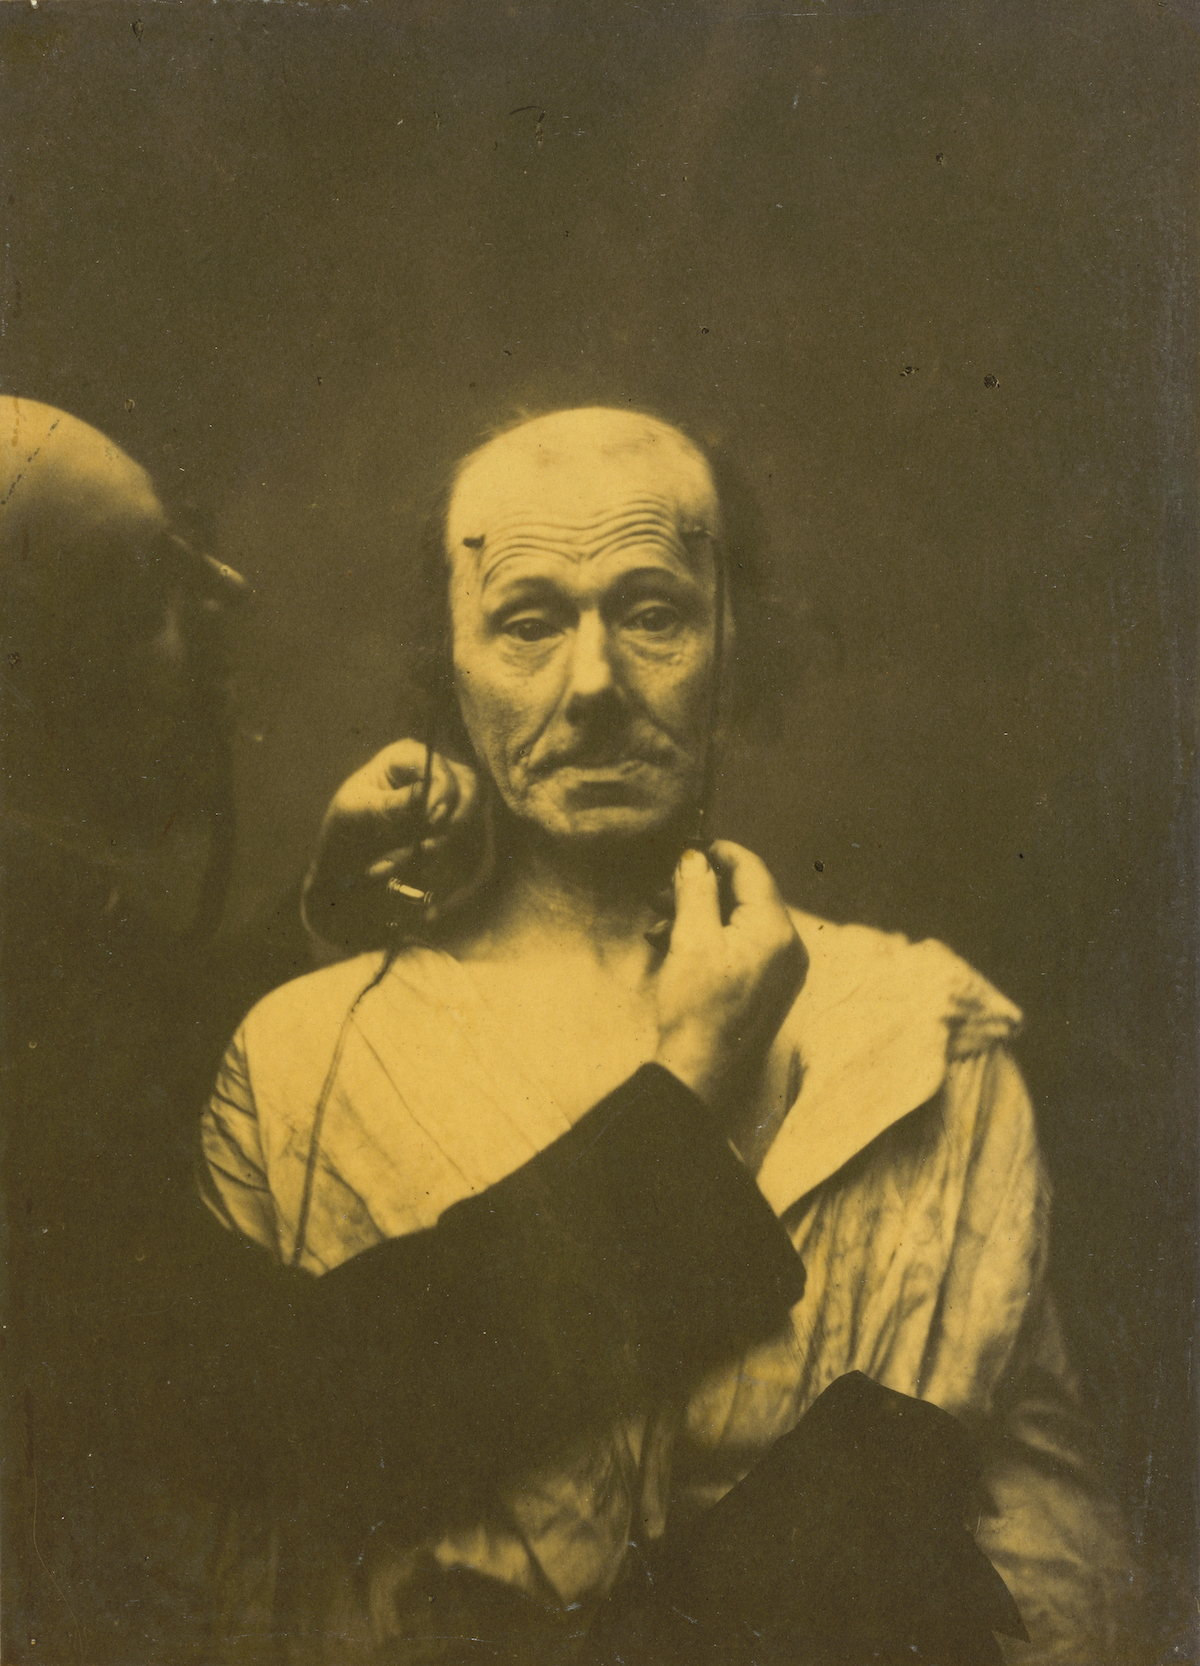 Experiments in facial expressions by Guillaume-Benjamin-Amand Duchenne de Boulogne